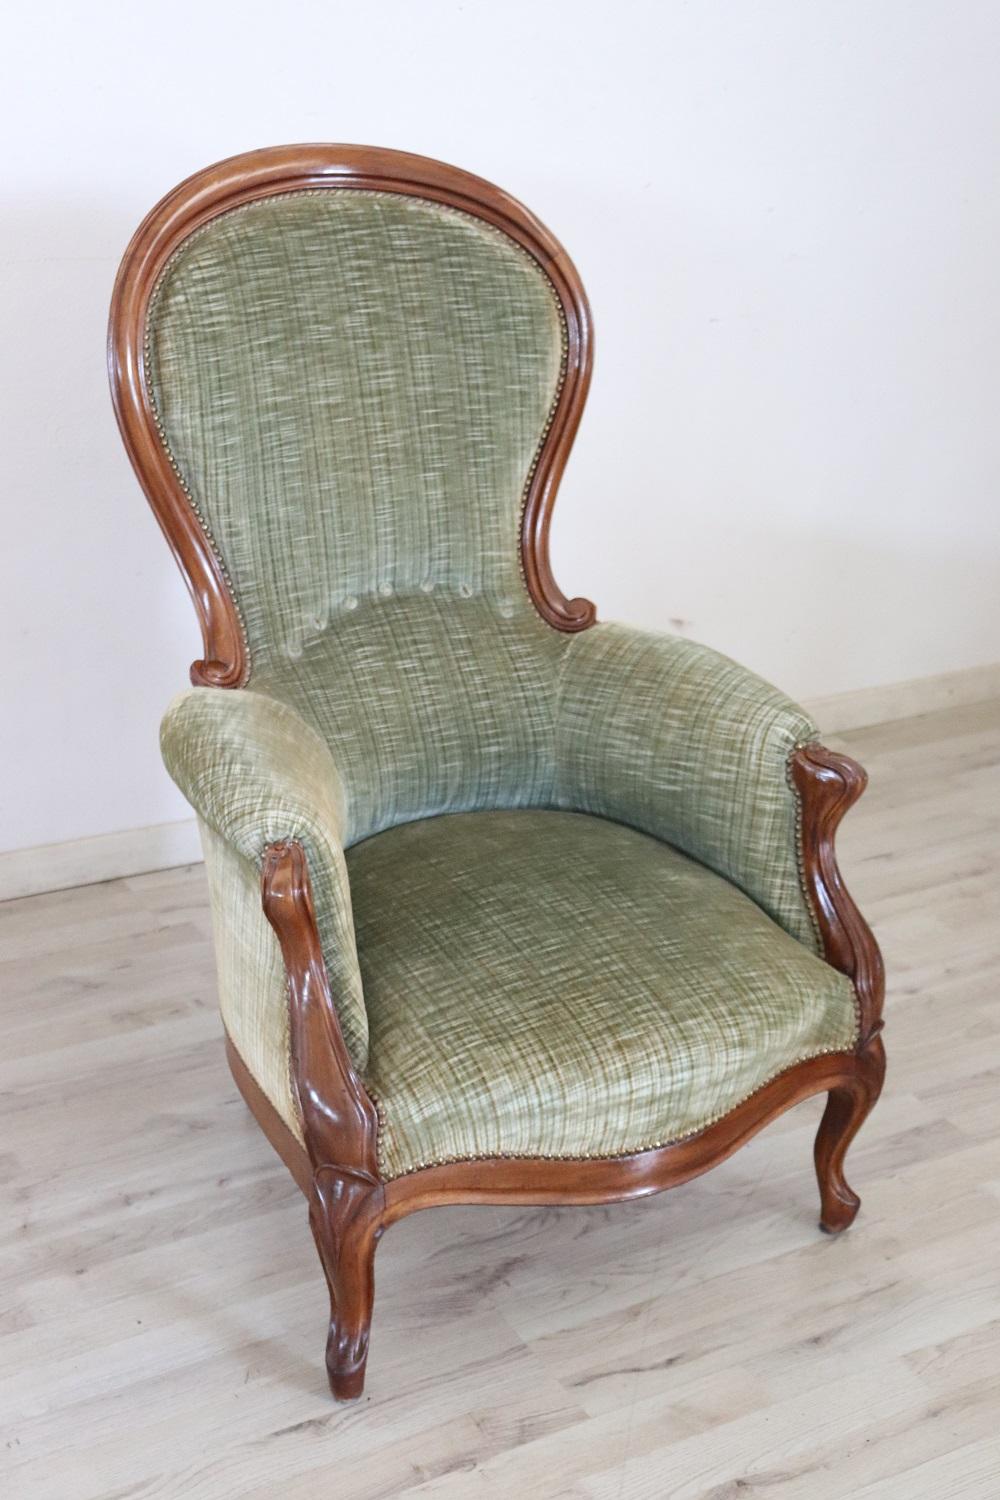 Lovely Italian armchair in solid walnut. This beautiful armchair has an enveloping shape and a comfortable seat. Lined with green velvet. The enveloping and relaxing backrest.
 